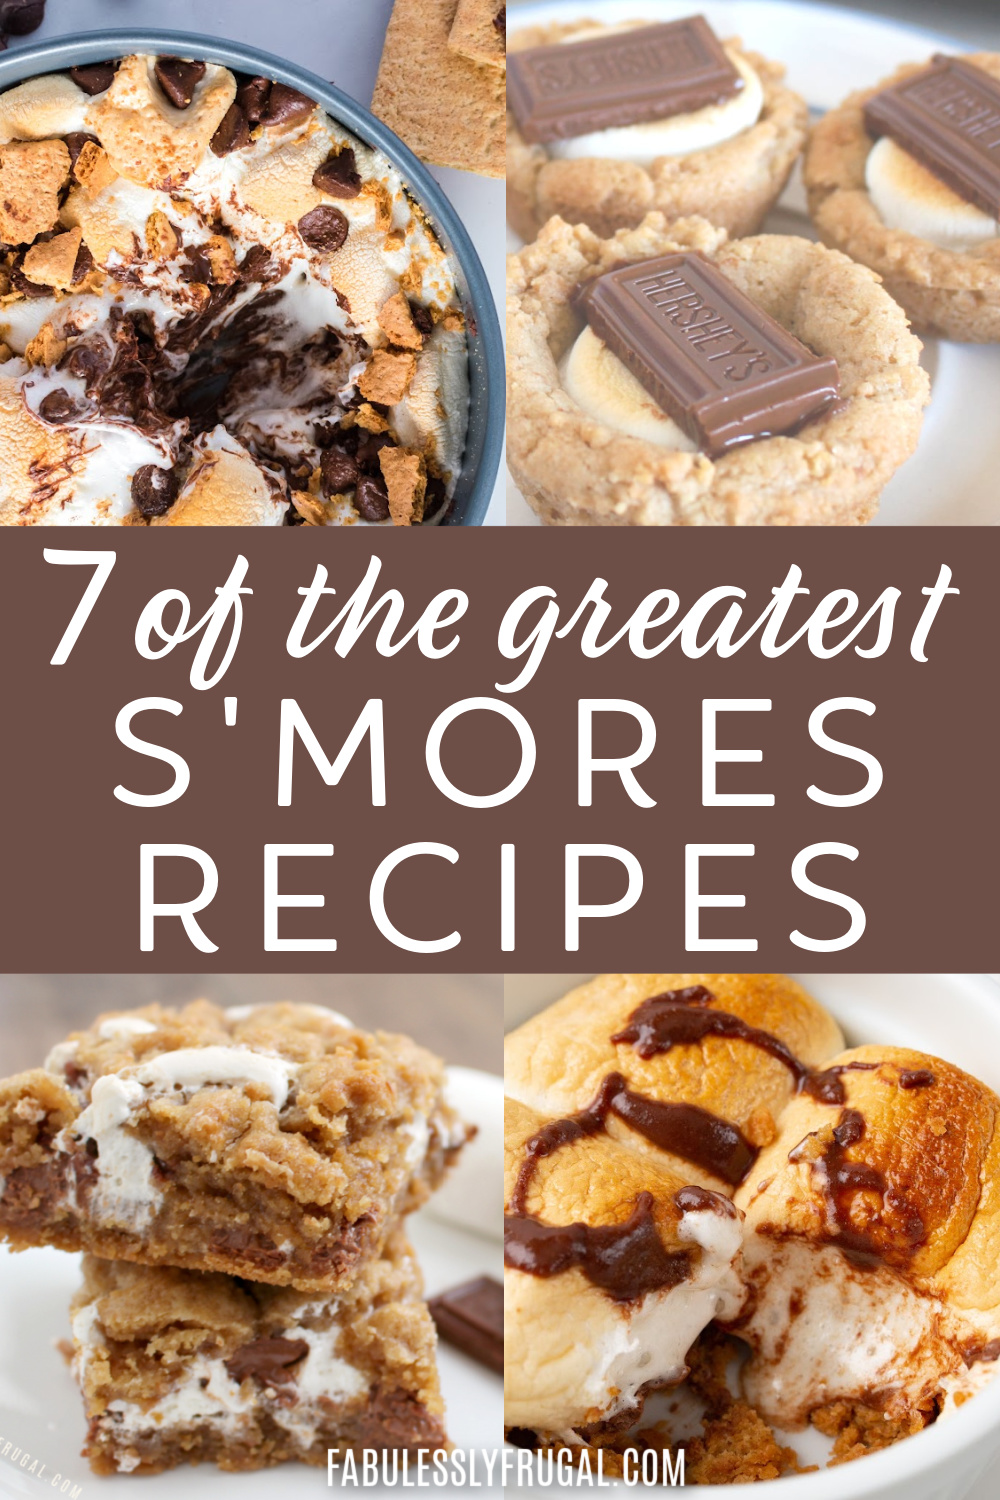 7 of the greatest smore recipes